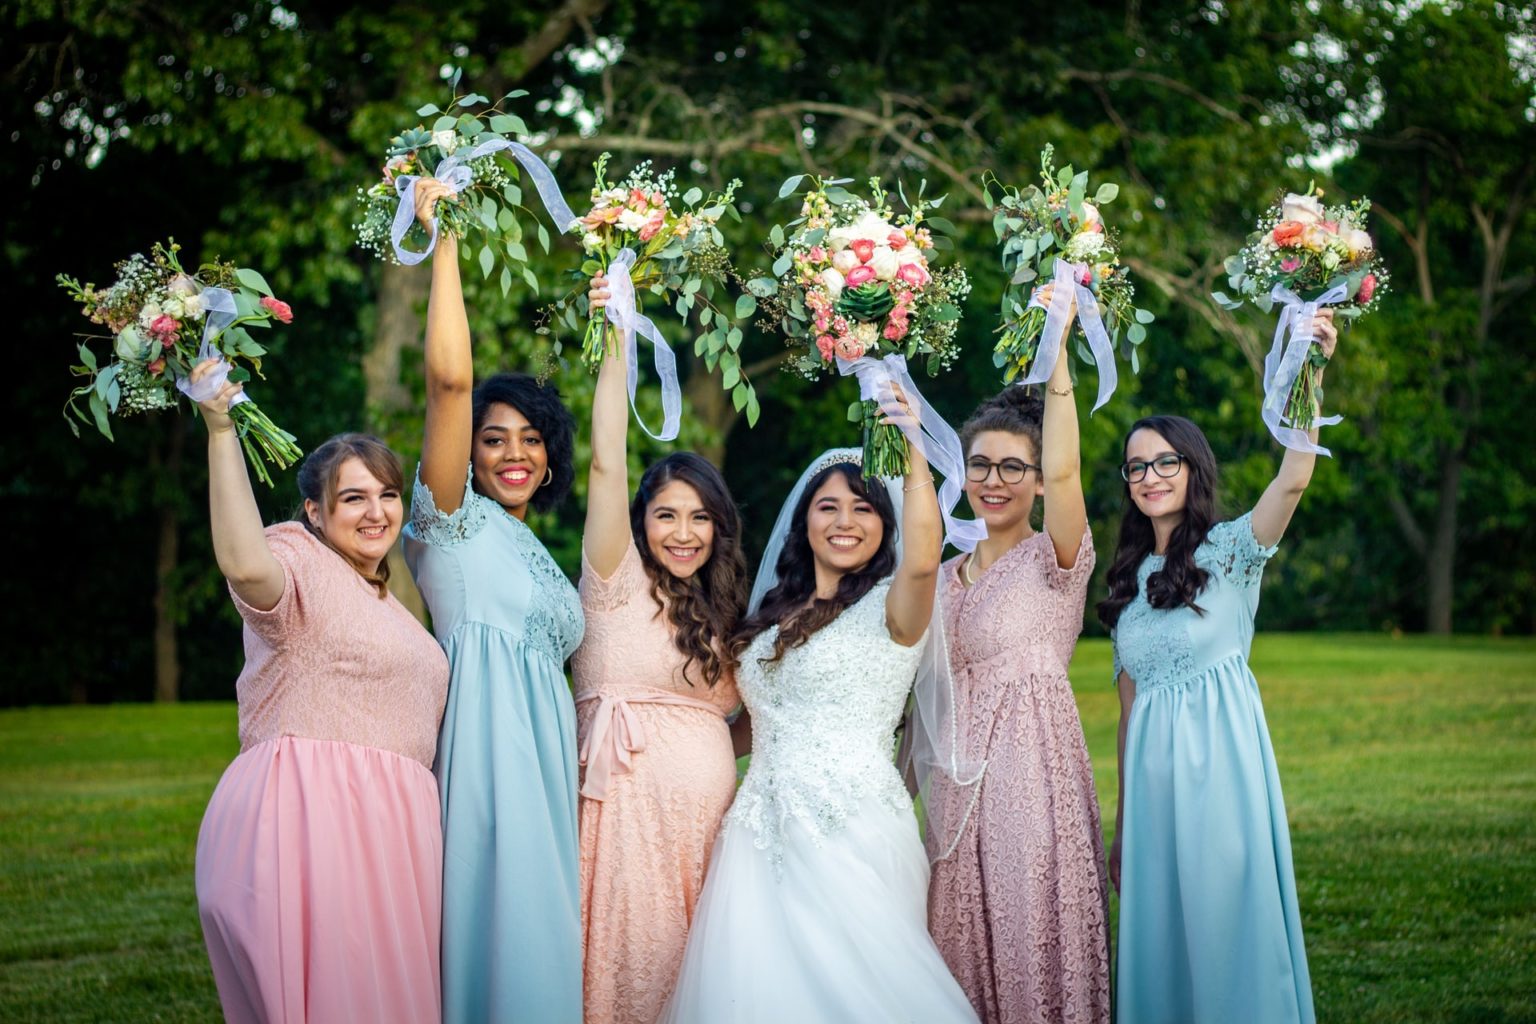 A bride and her bridesmaids smiling and holding their bouquets in the air